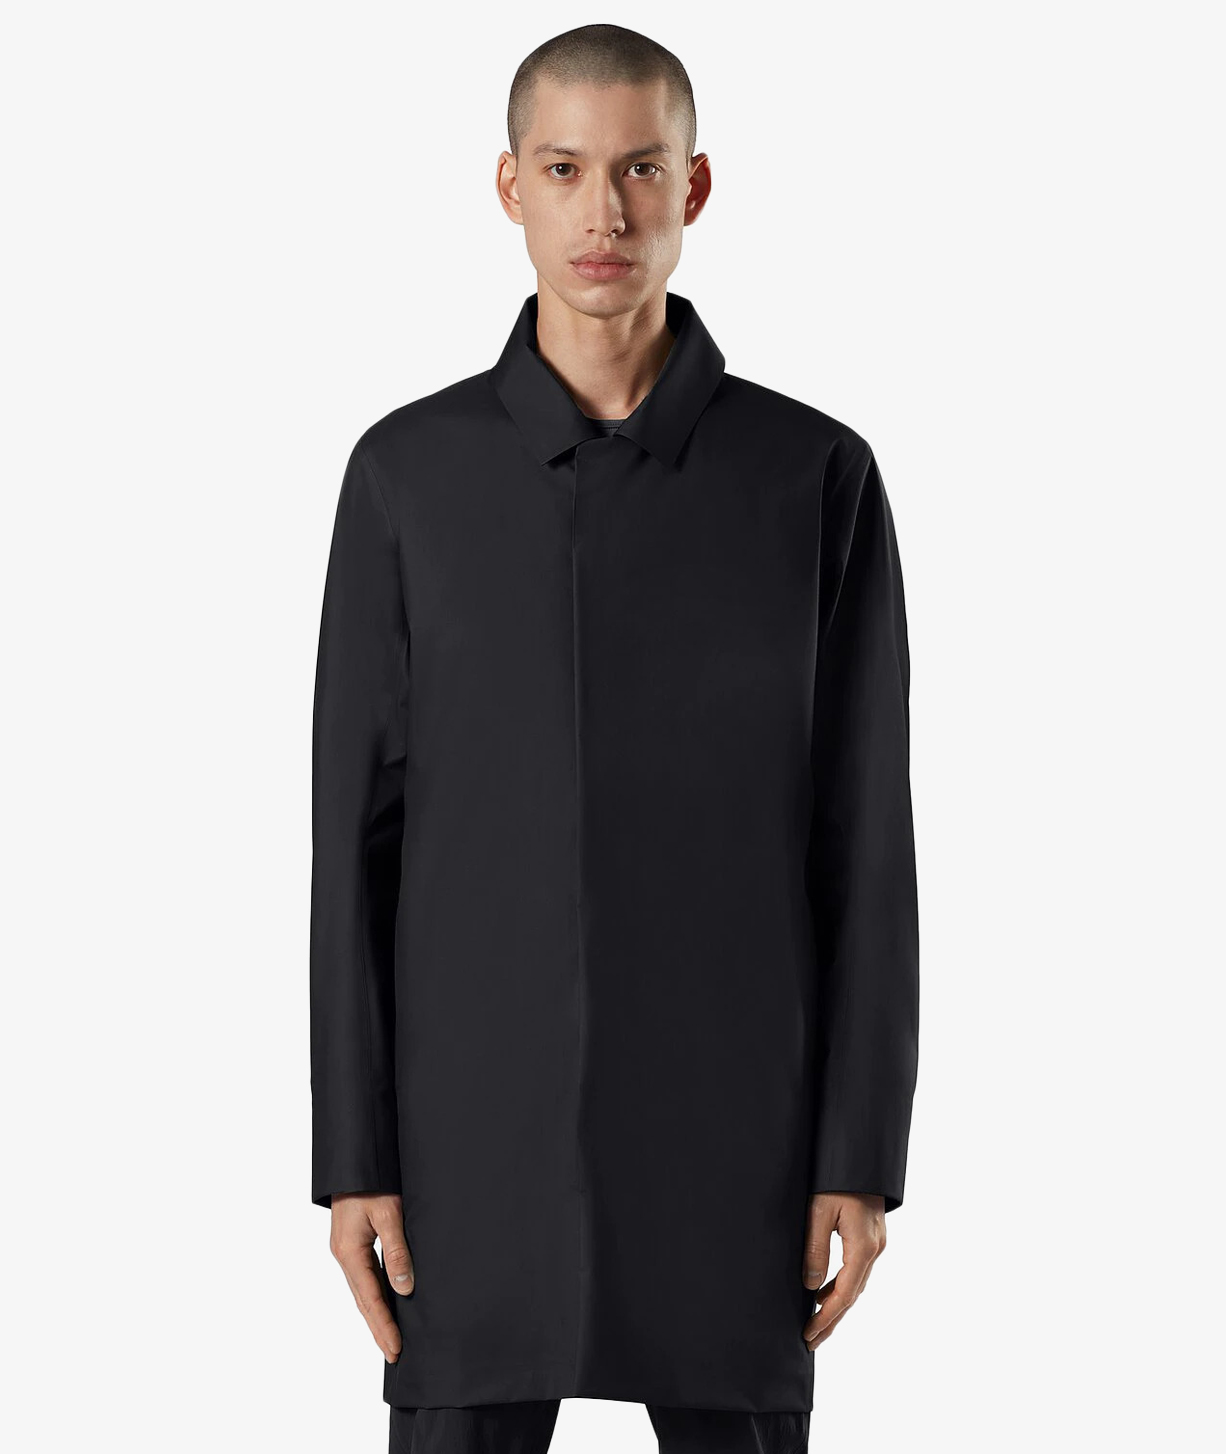 Norse Store | Shipping Worldwide - Partition LT Coat by Veilance